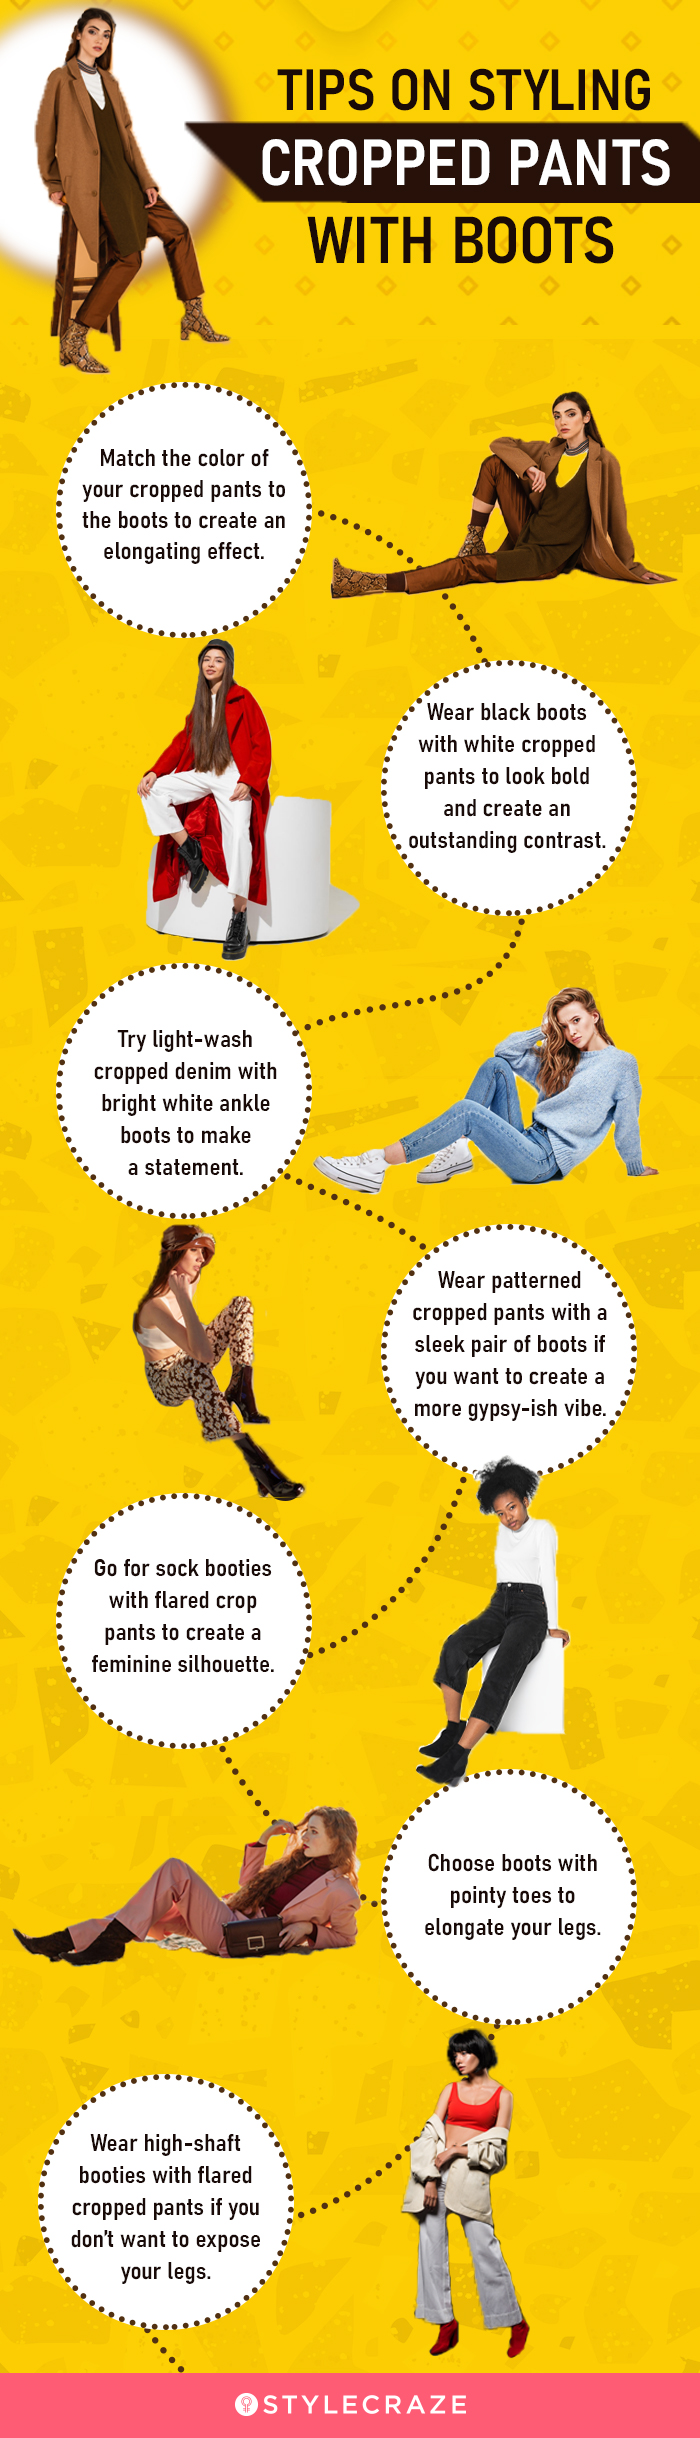 tips on styling cropped pants with boots (infographic)